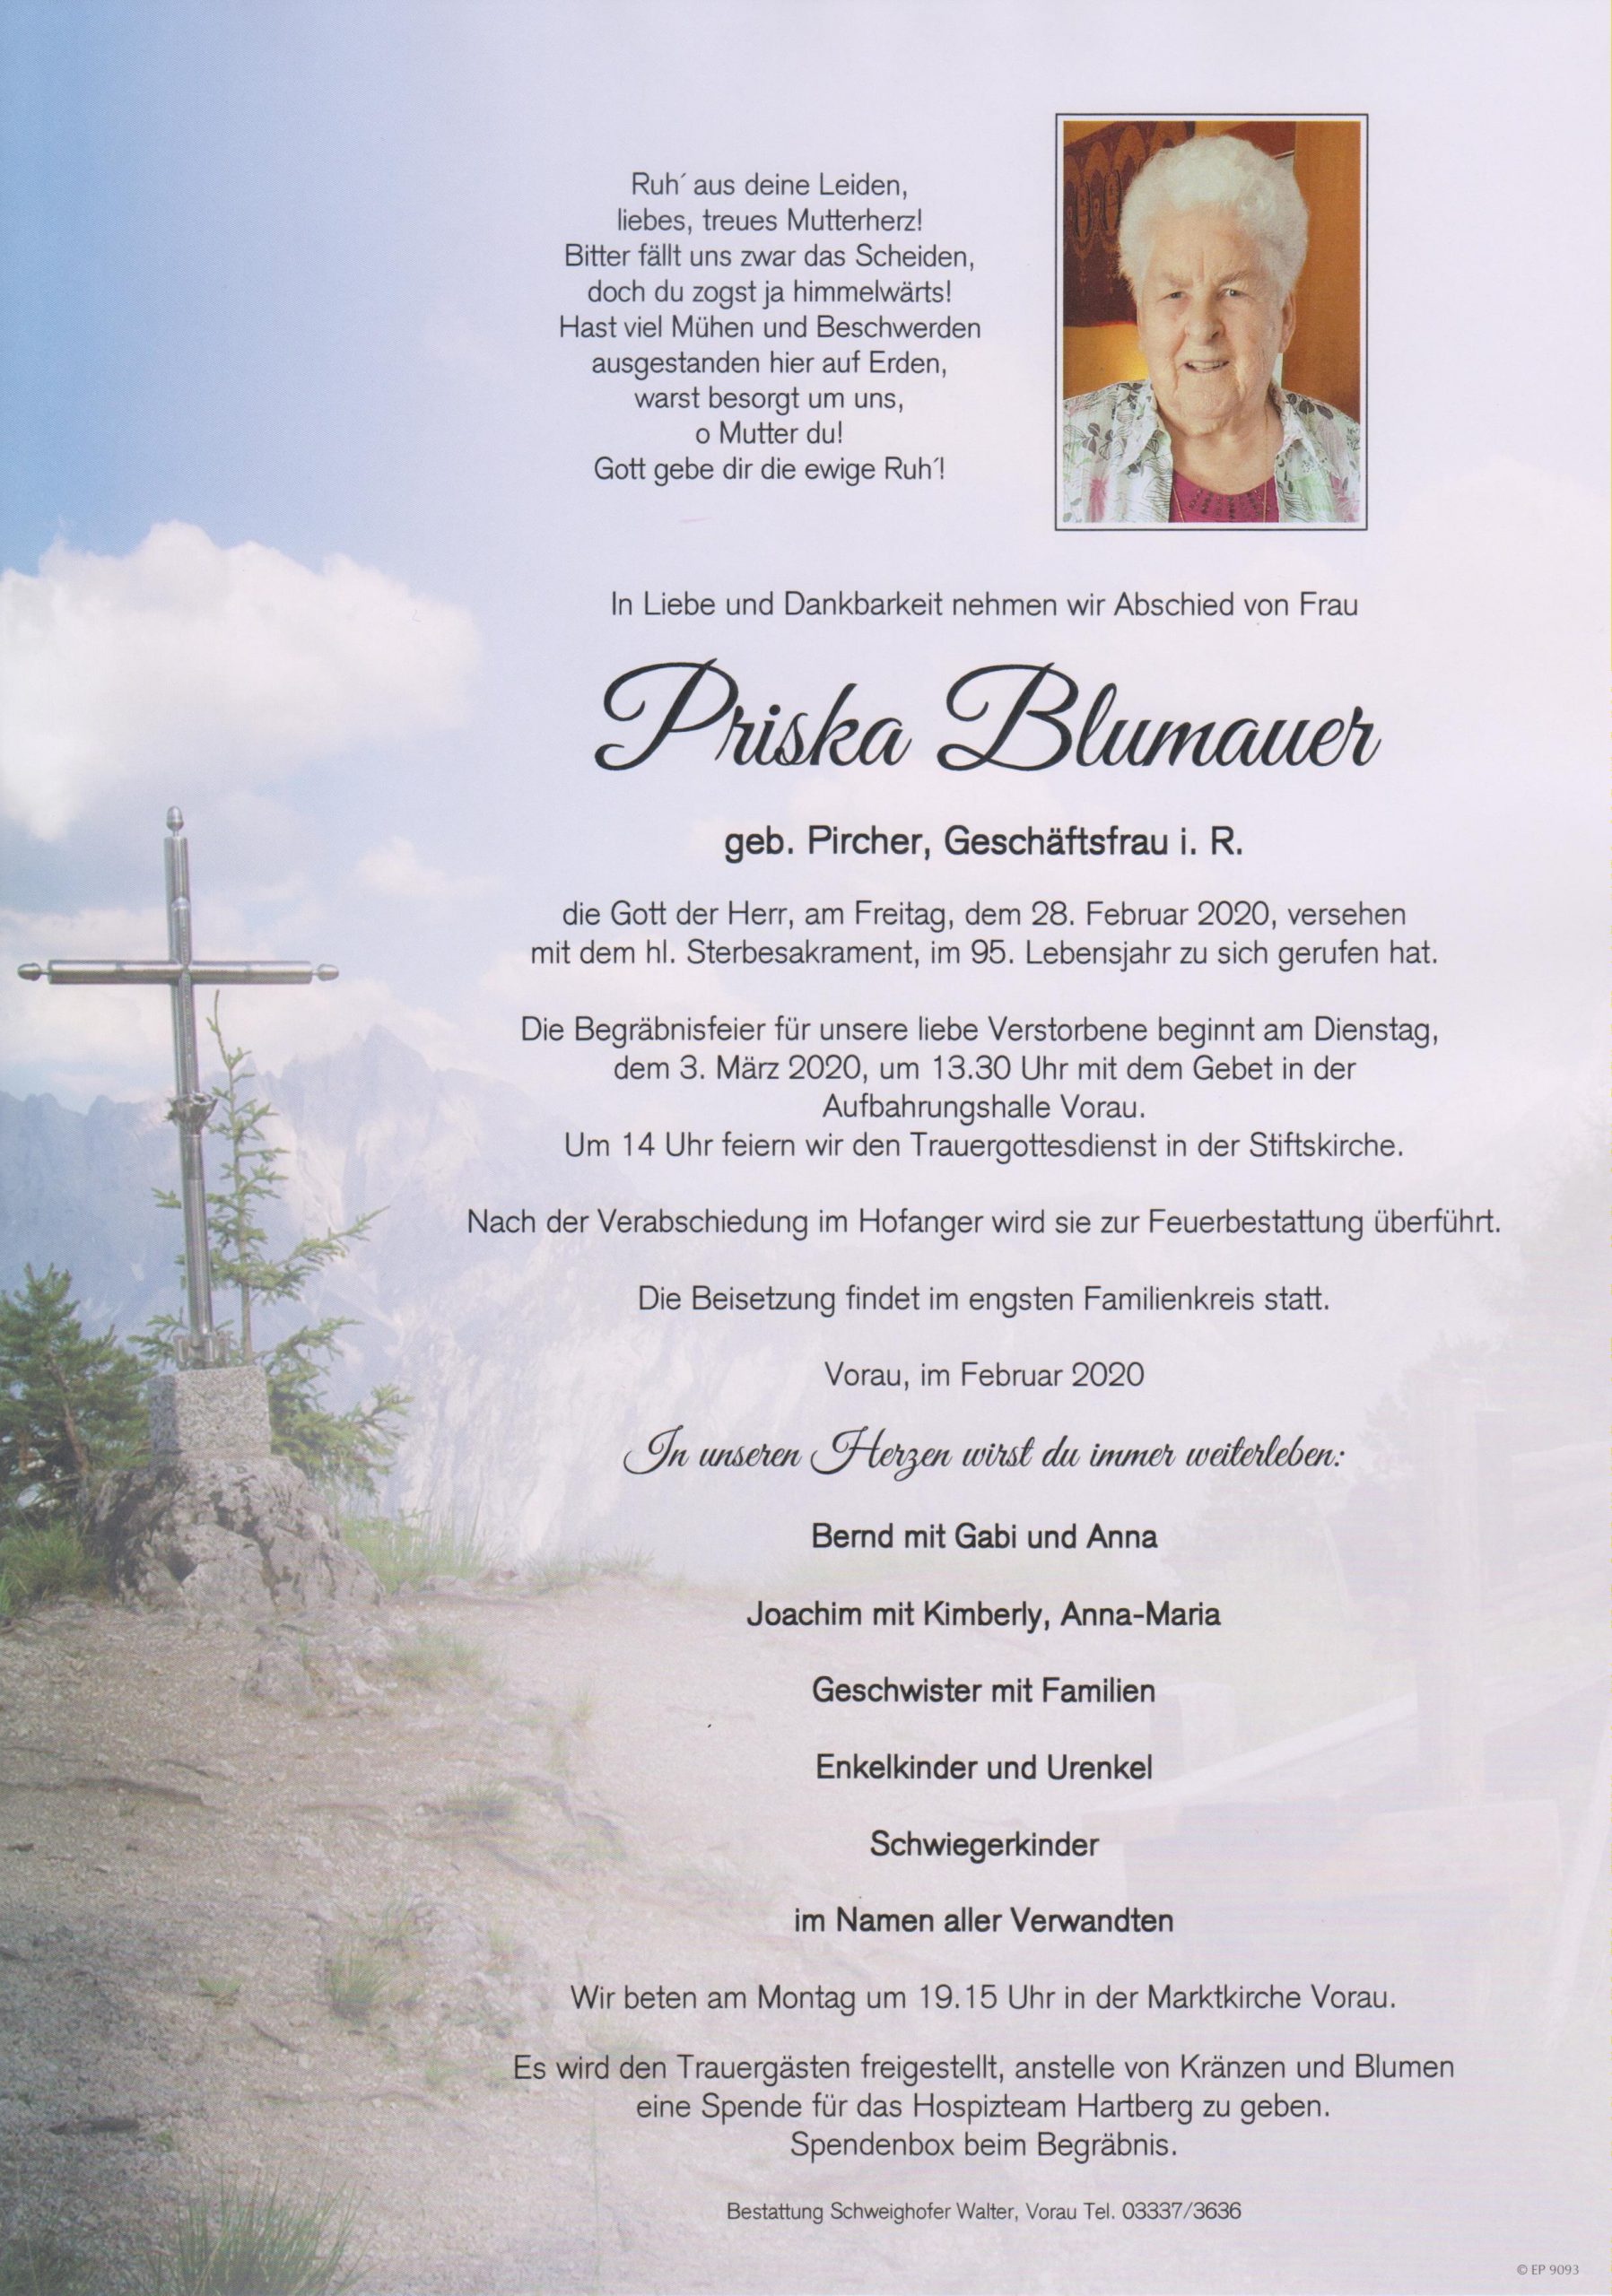 You are currently viewing Priska Blumauer